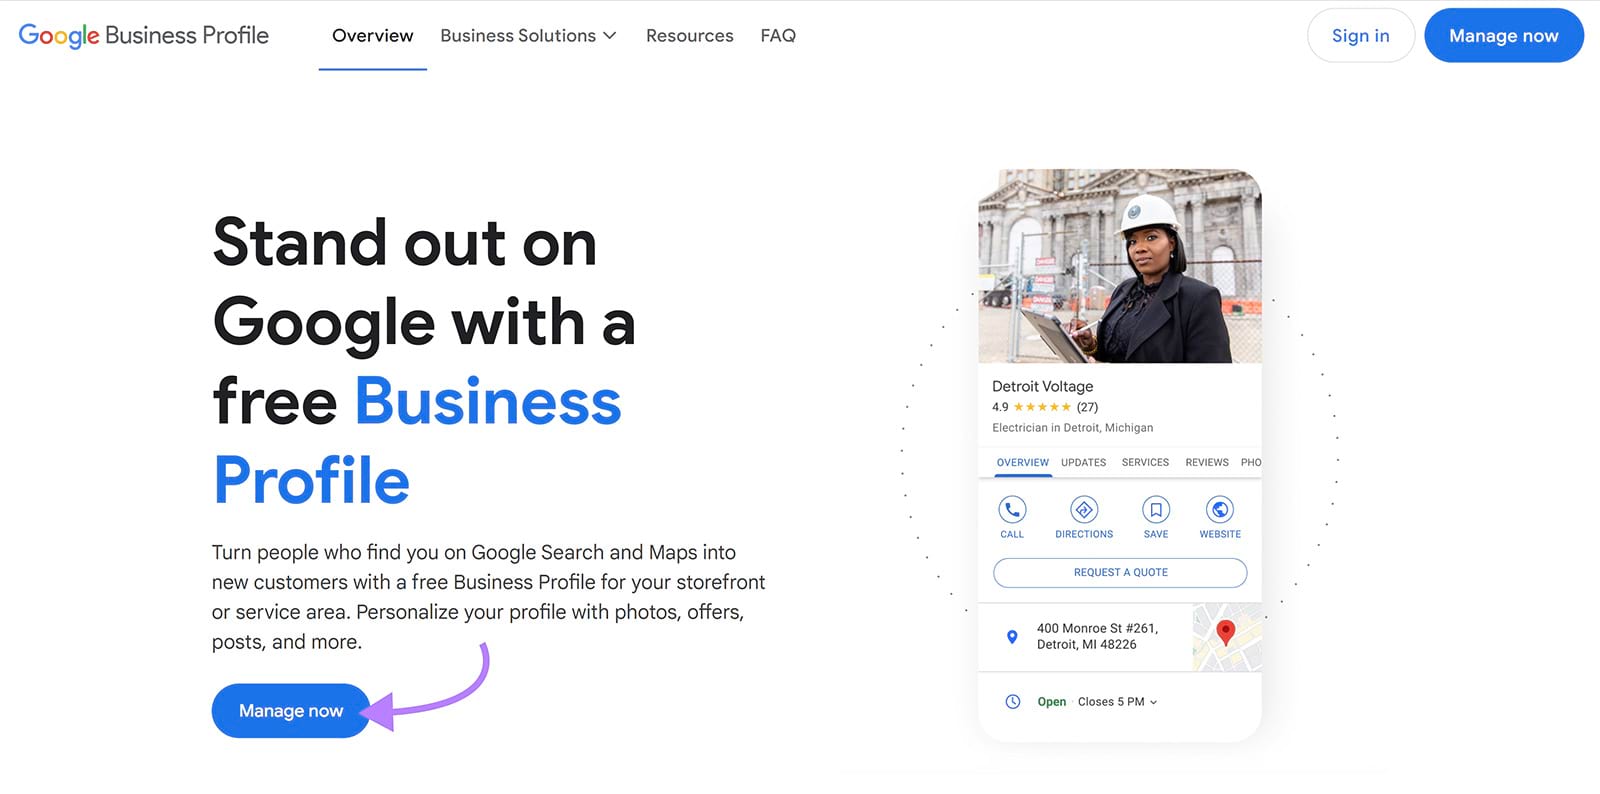 Google Business Profile landing page with arrow pointing to Manage now button.